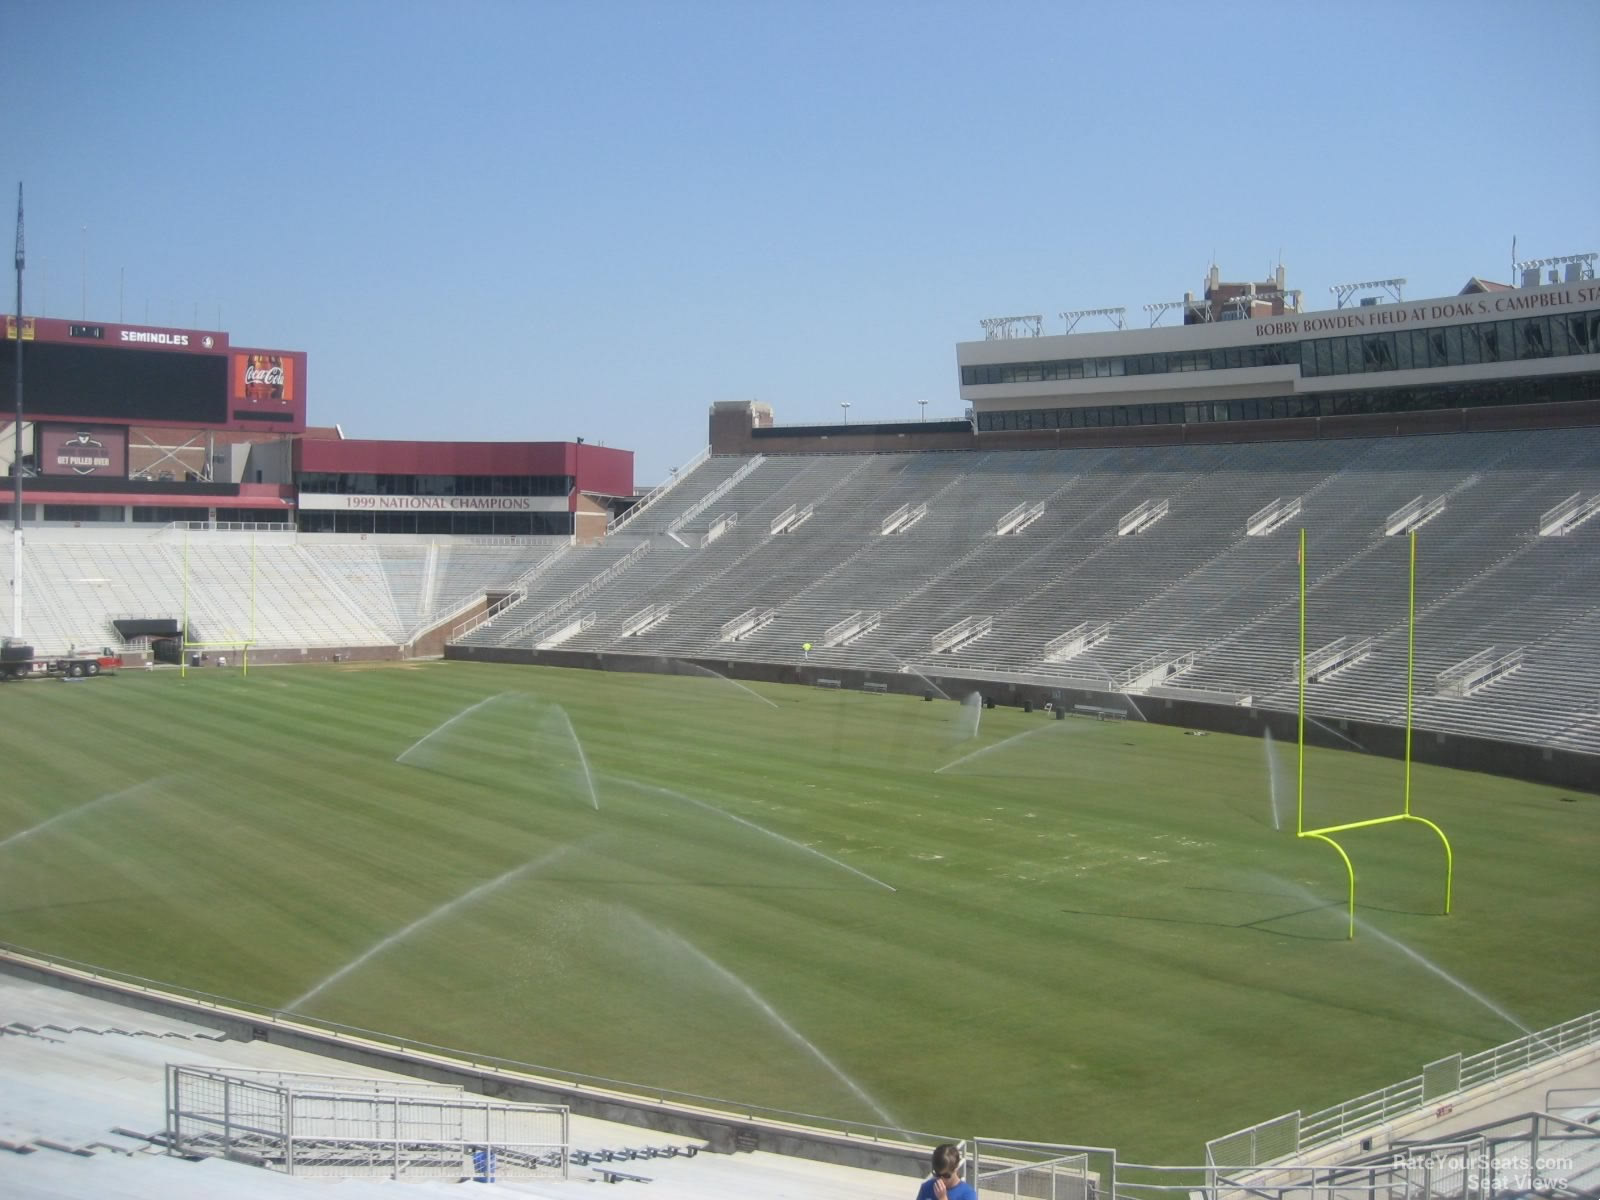 section 123, row 40 seat view  - doak campbell stadium